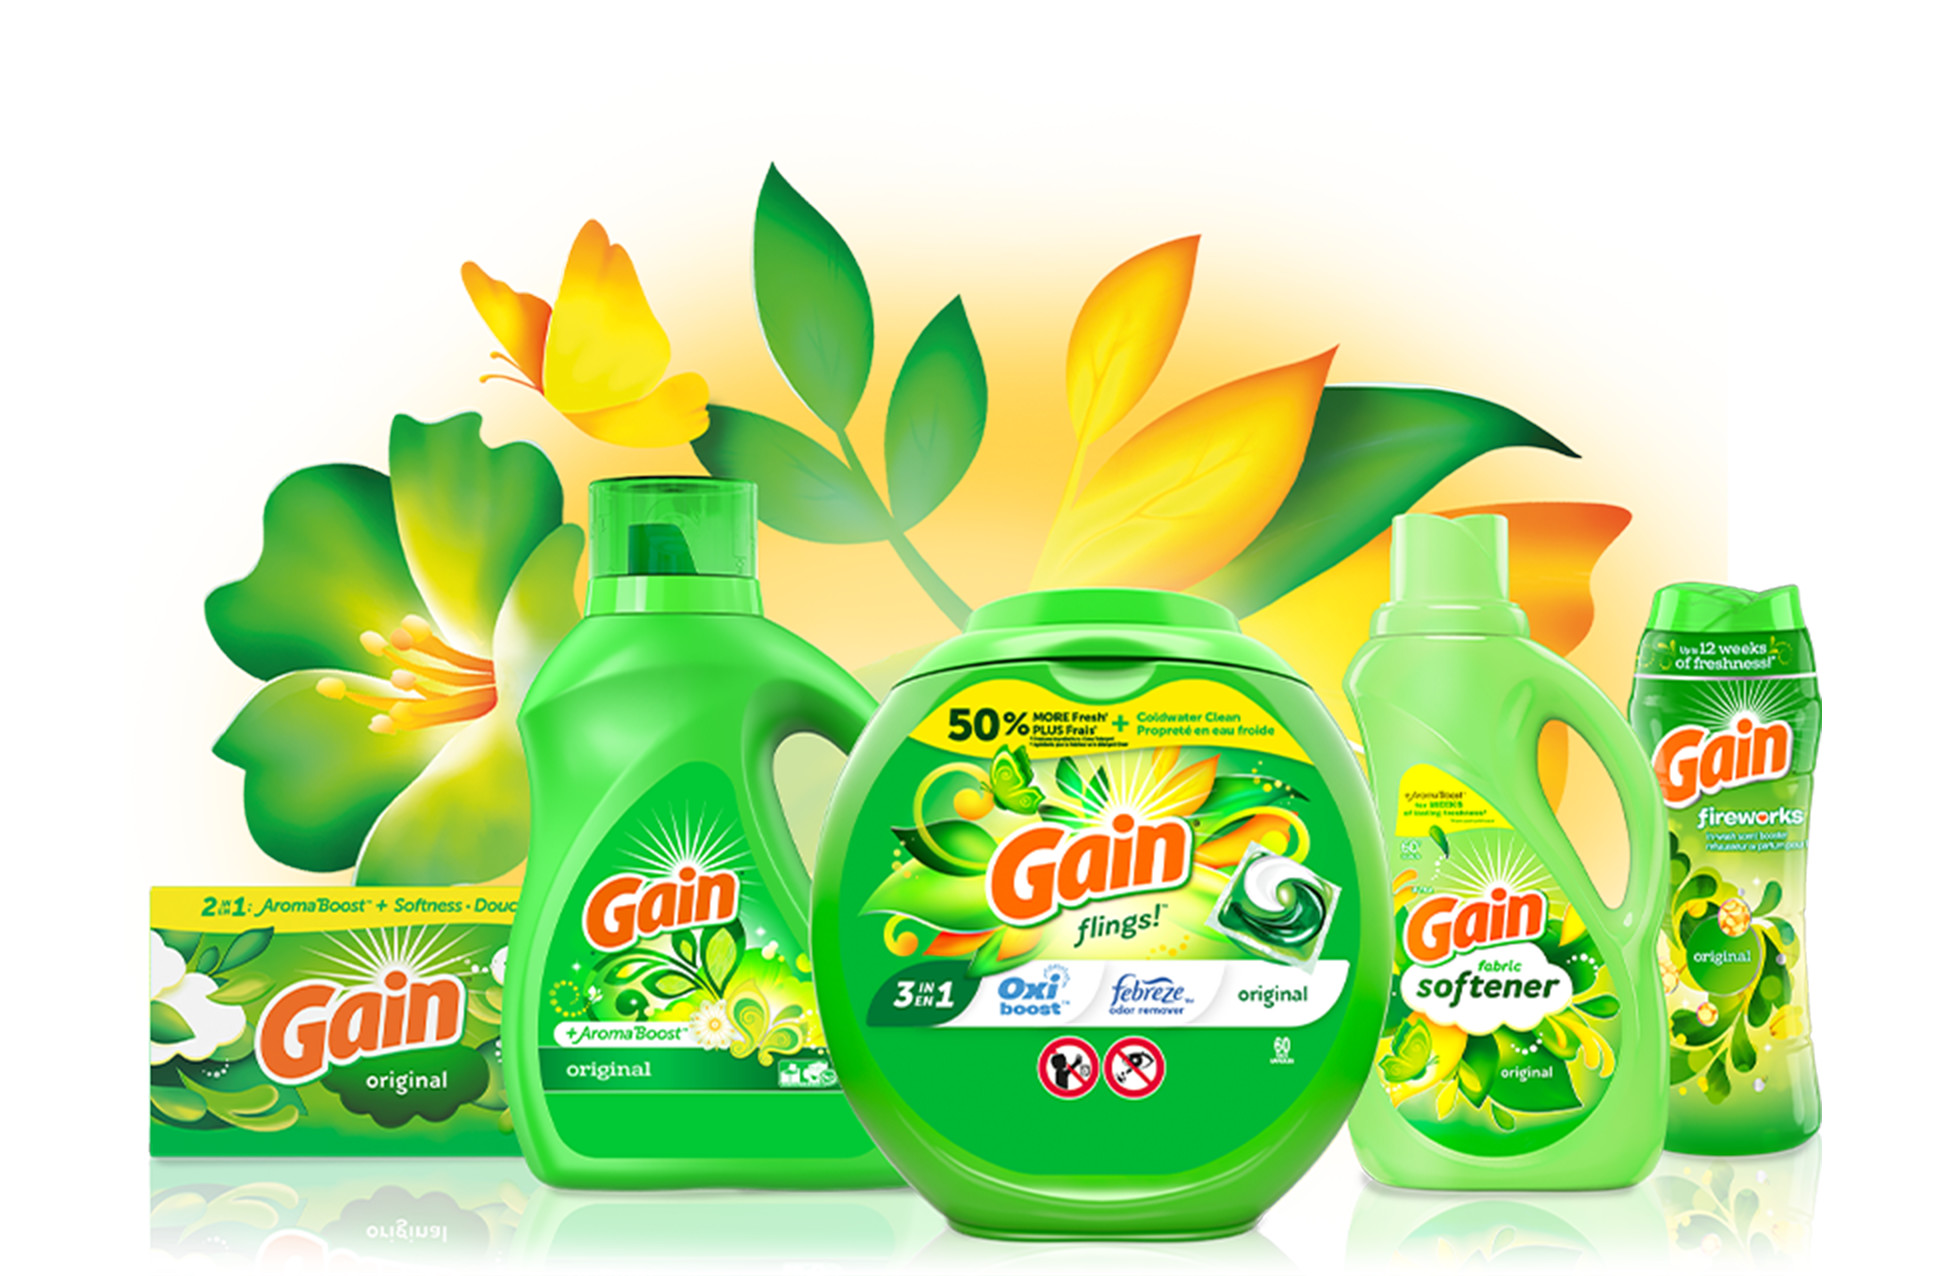 Gain Products by Type